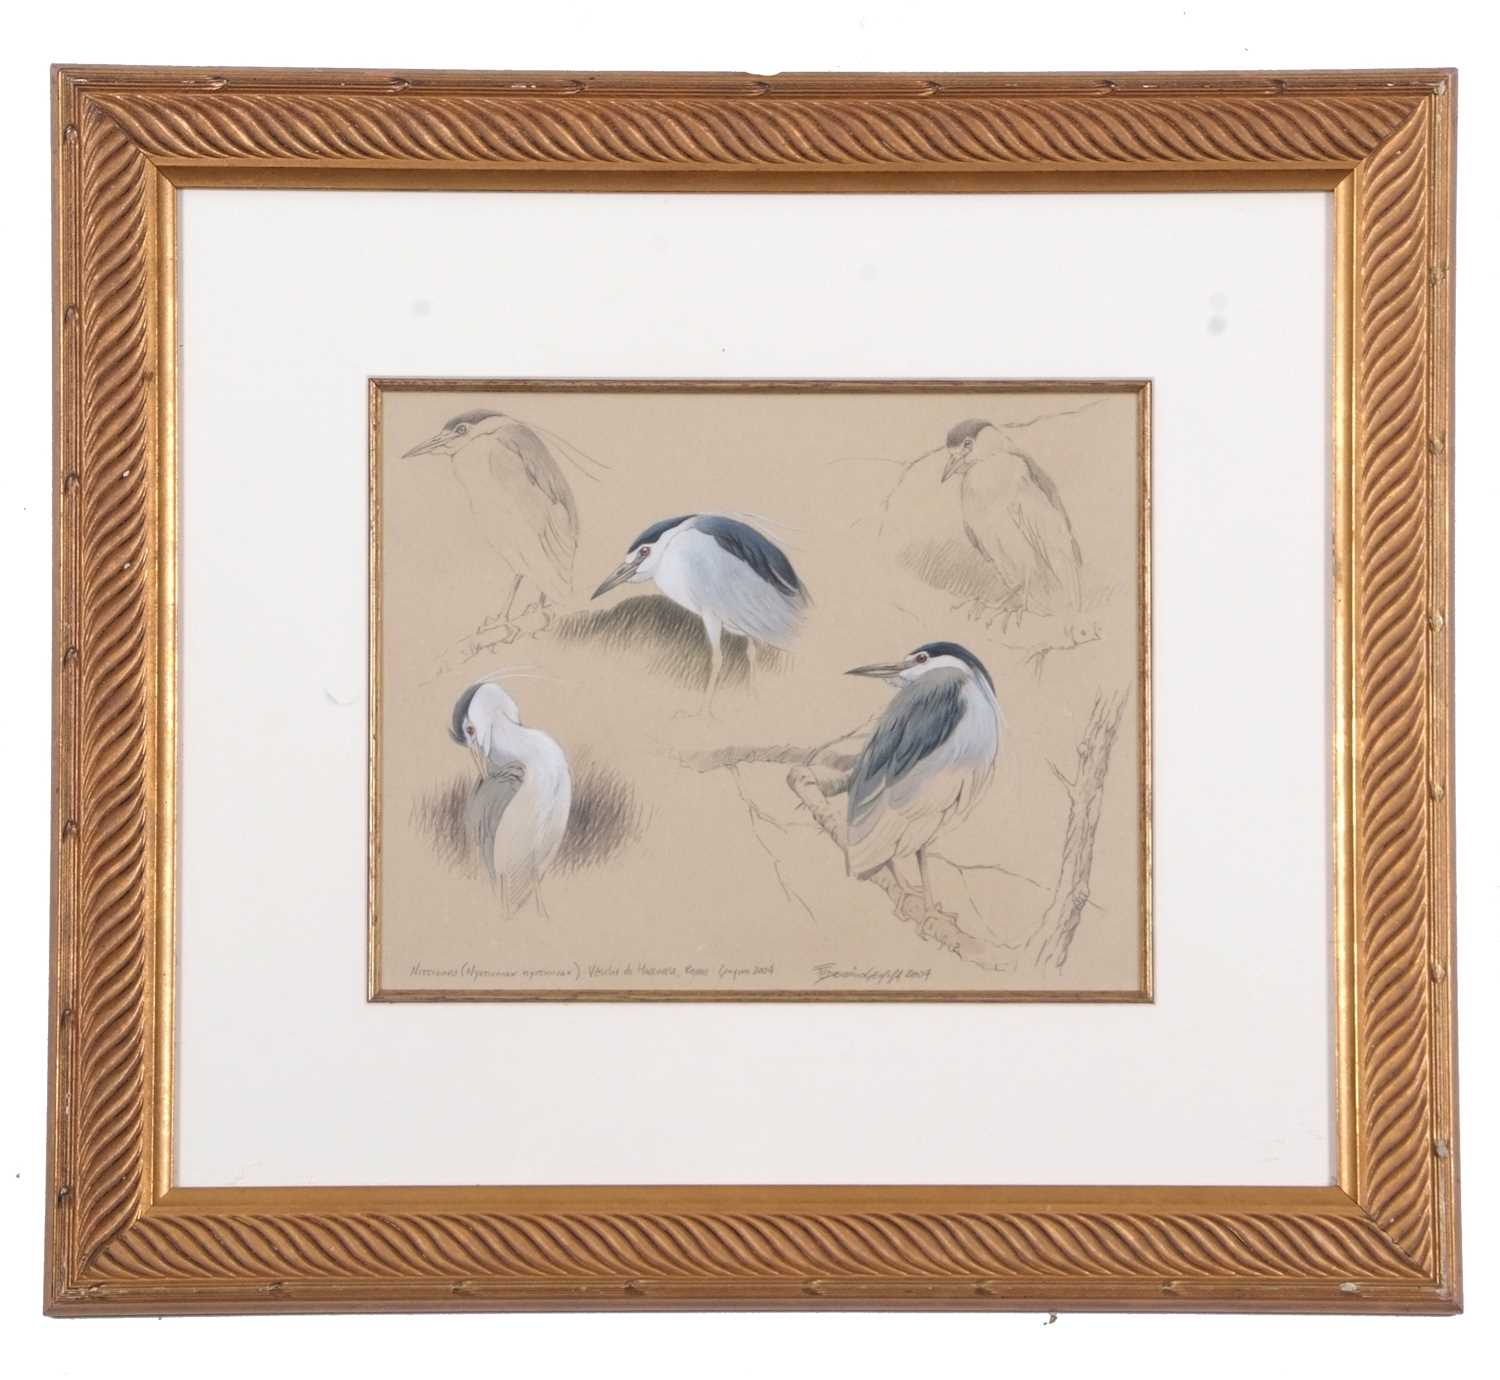 Federico Gemma SWLA (Italian, b.1970), 'Night Heron Studies' watercolour and pencil on paper, signed - Image 2 of 2